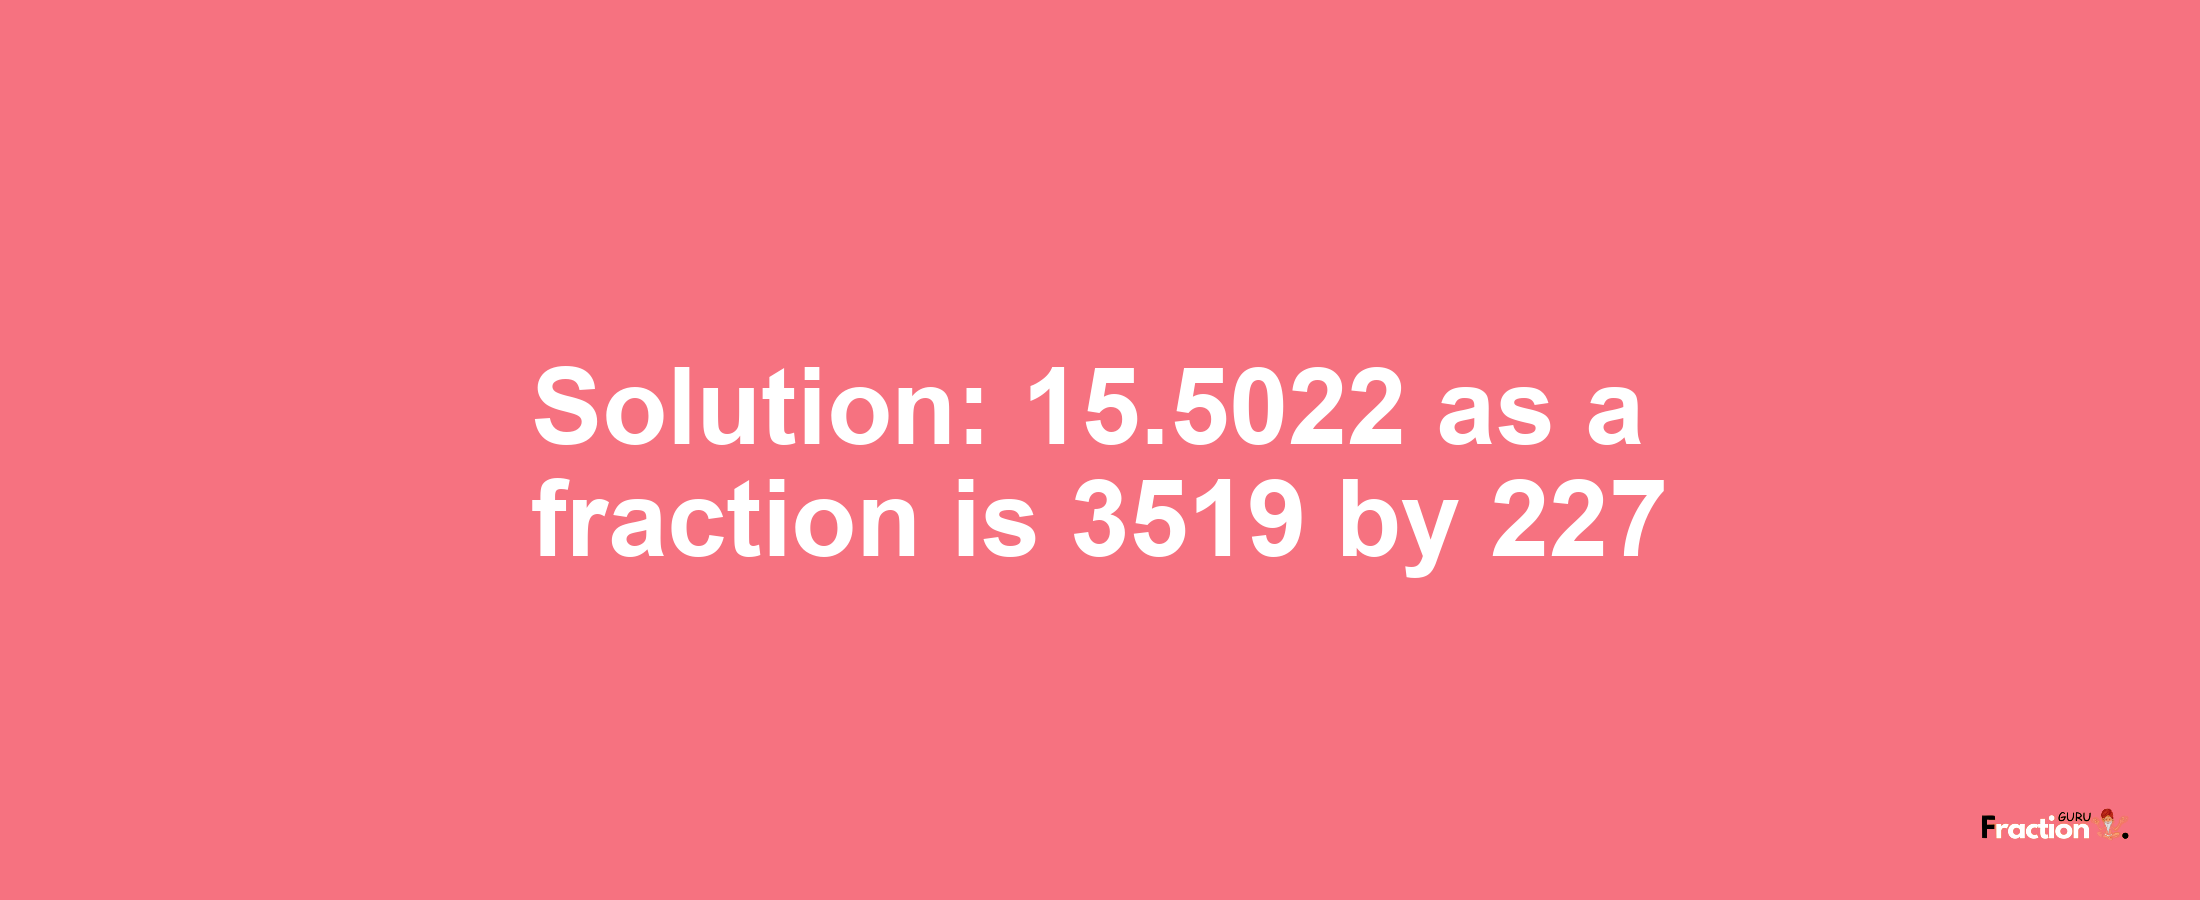 Solution:15.5022 as a fraction is 3519/227